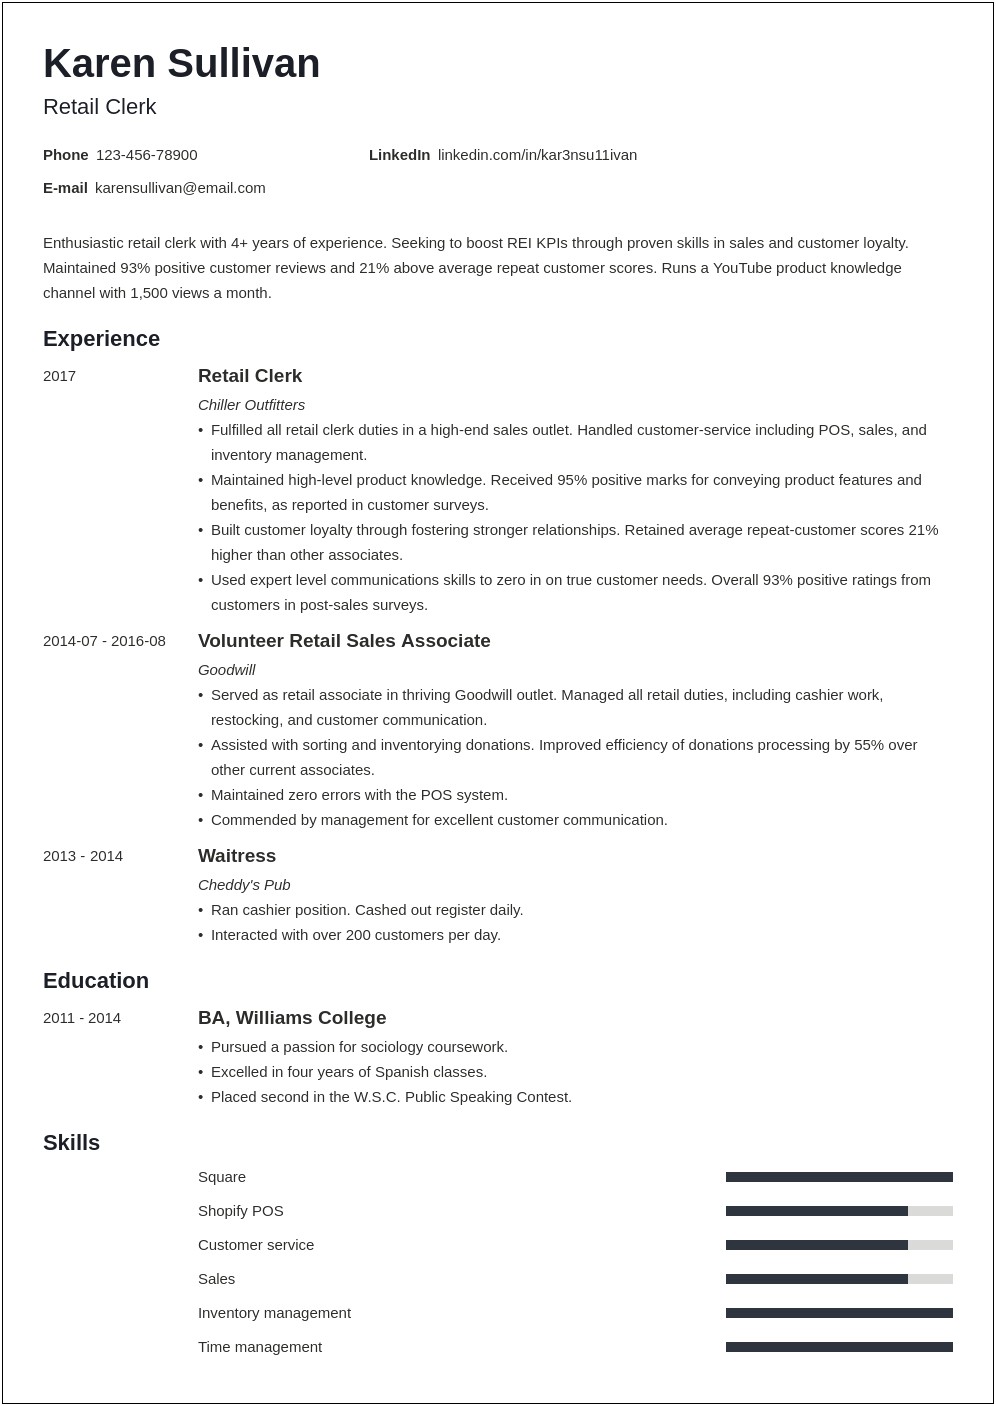 Resume Skills Section For Retail